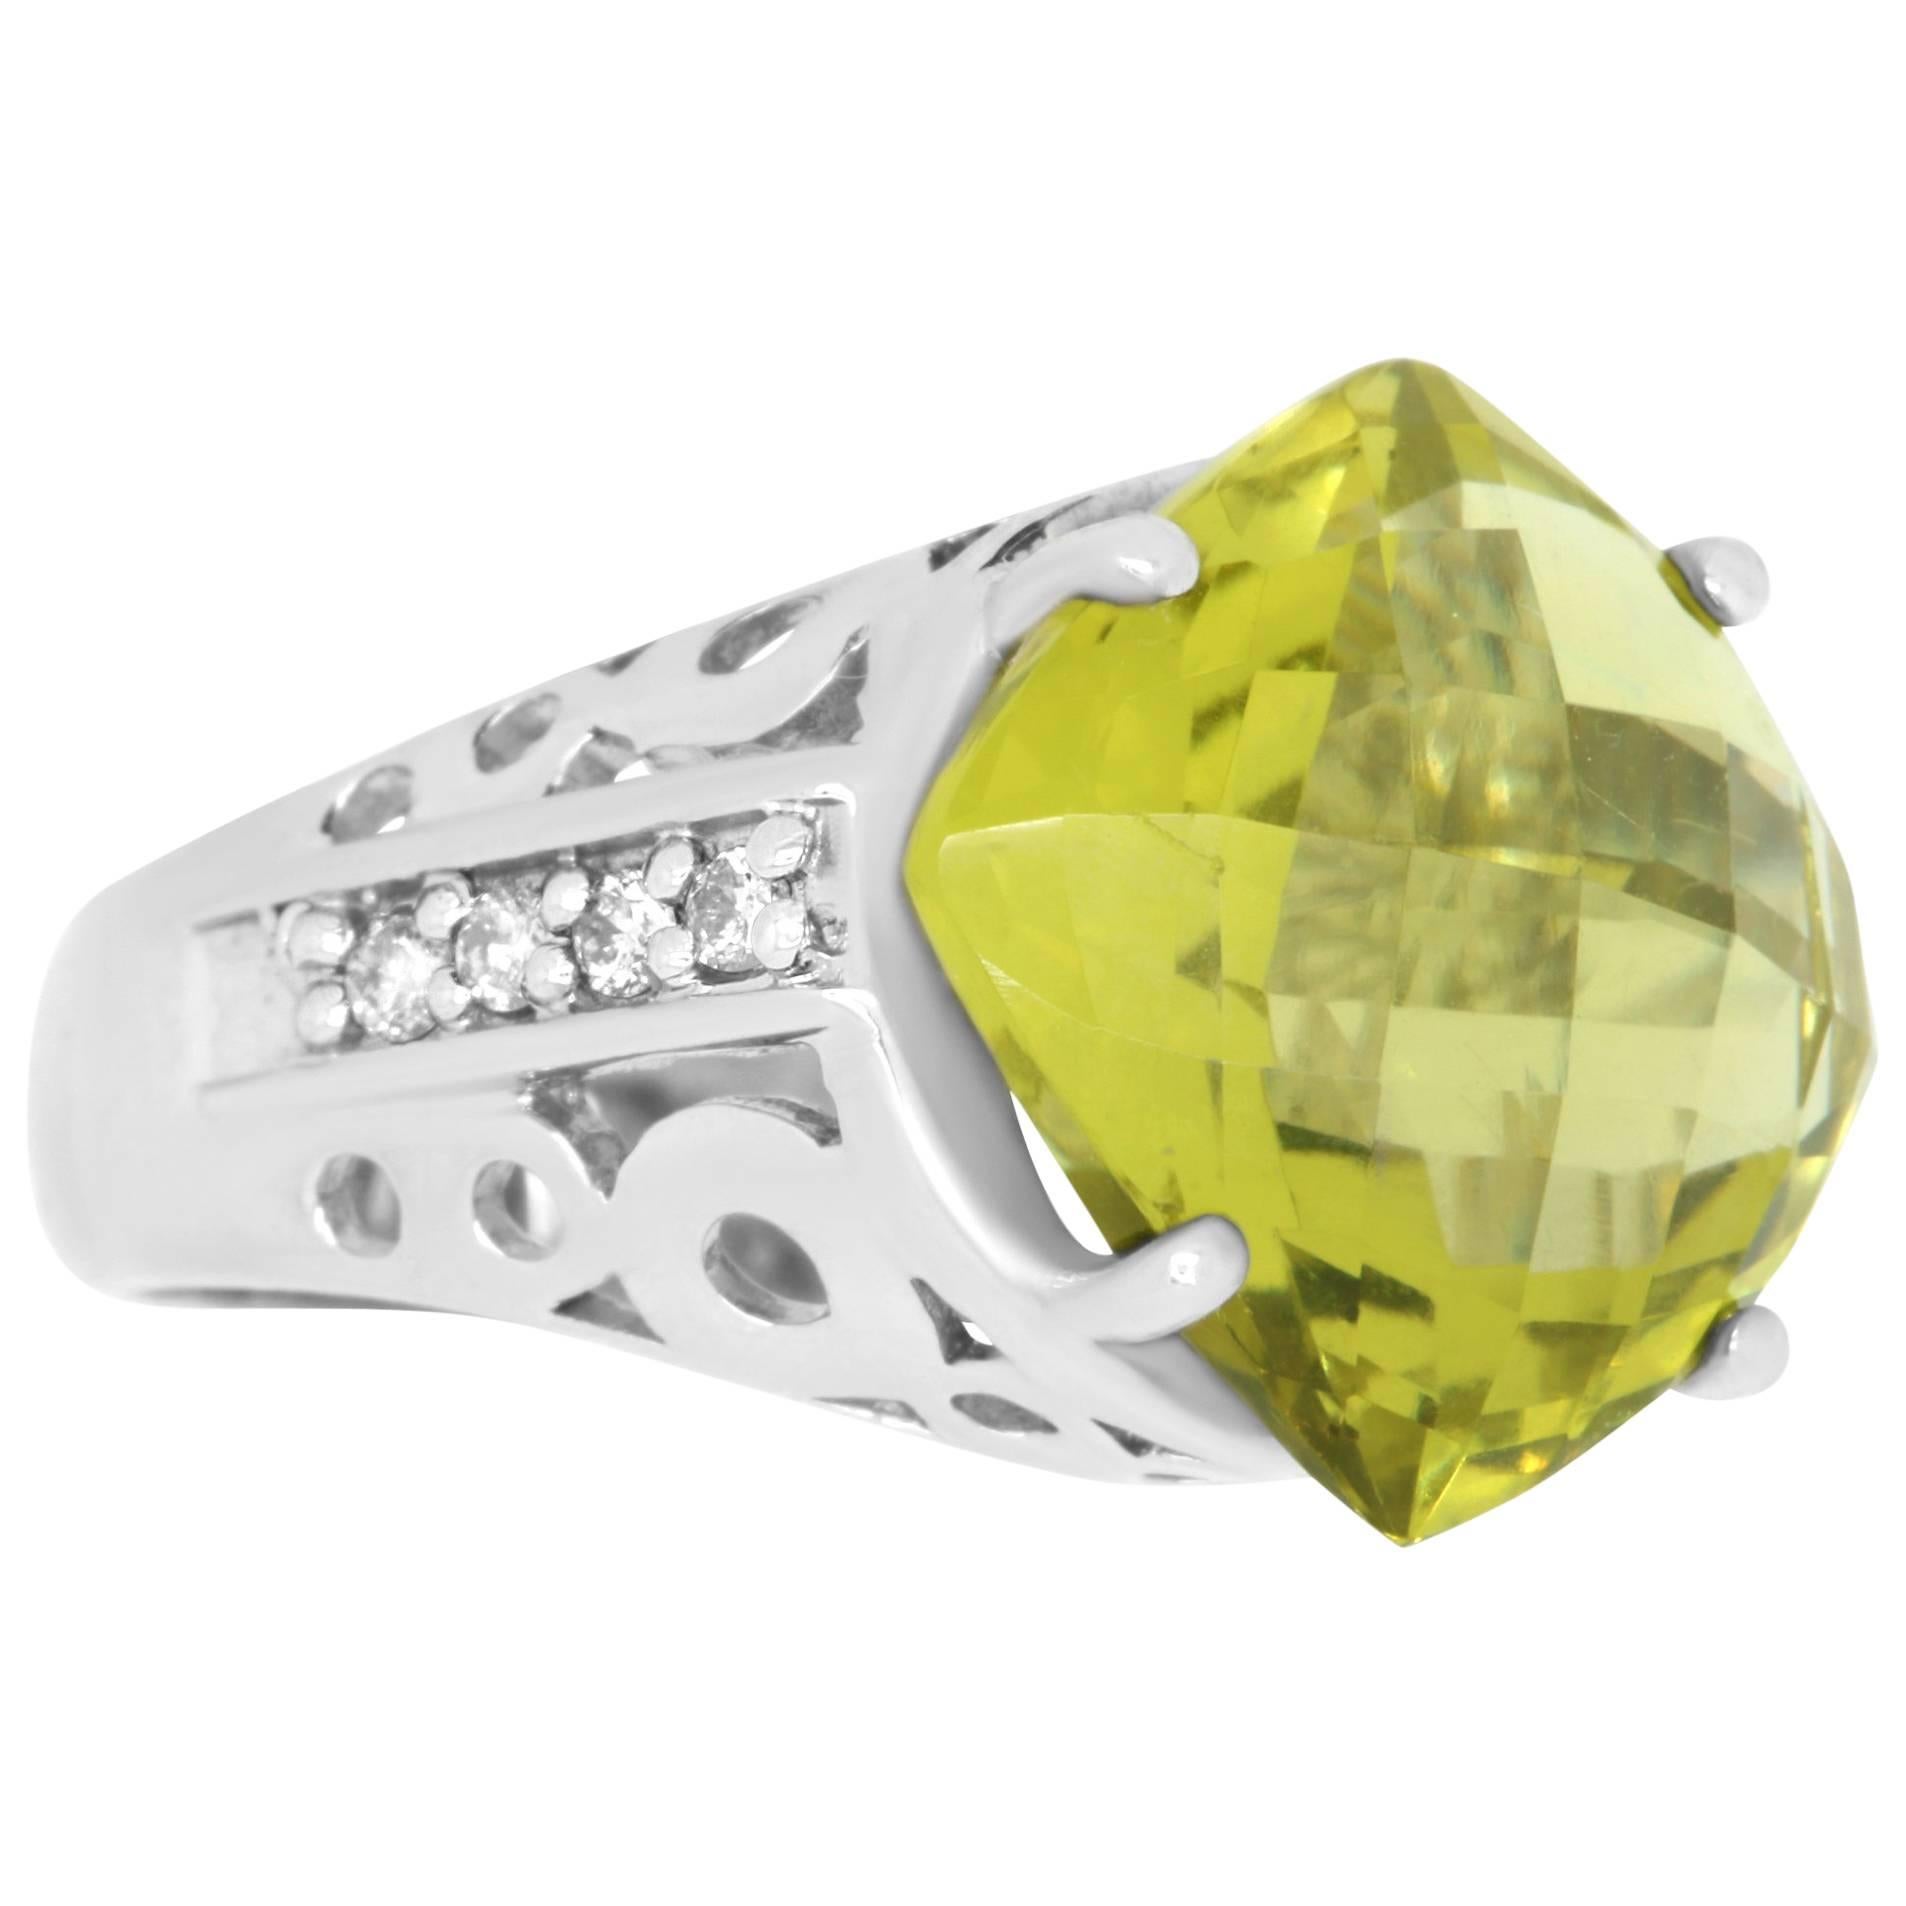 Material: 14k White Gold 
Center Stone Details: 9.84 Carat Cushion Cut Checker Cut Green Quartz
Mounting Stone Details: 8 Brilliant Round White Diamond at 0.20 Carats - Clarity: SI / Color:  H-I
Size: Can be sized.

Fine one-of-a-kind craftsmanship